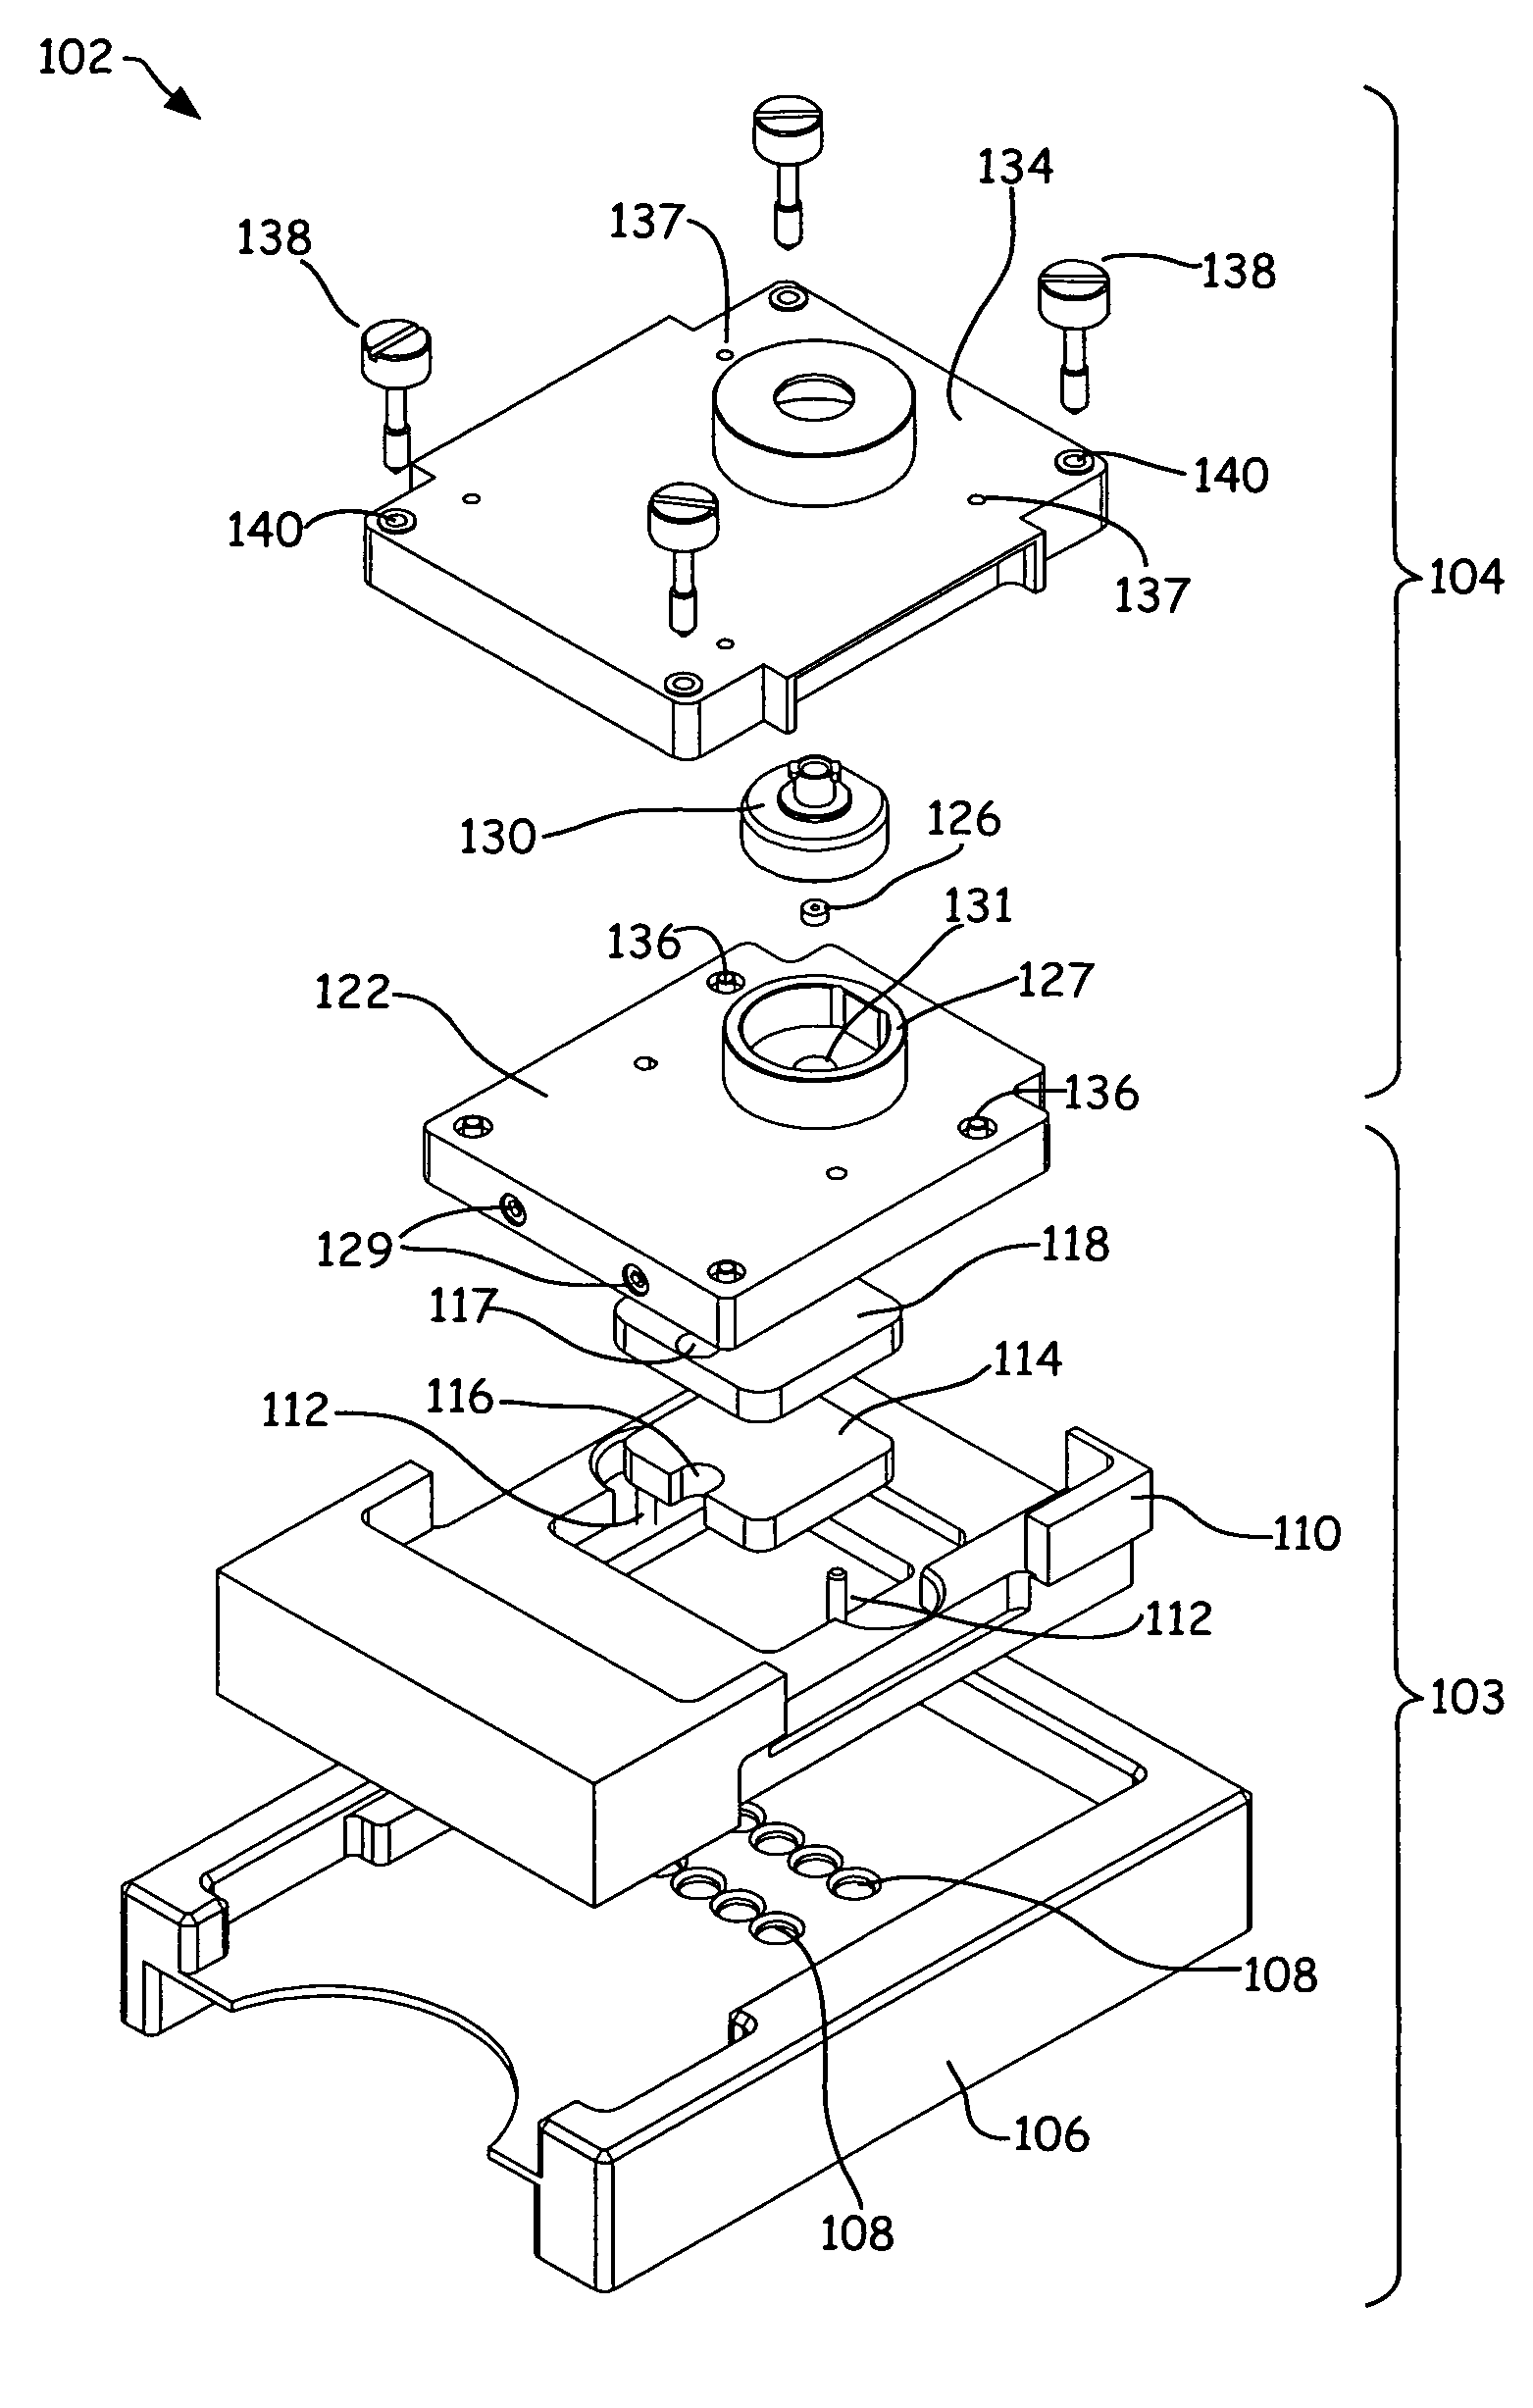 Priming module for microfluidic chips